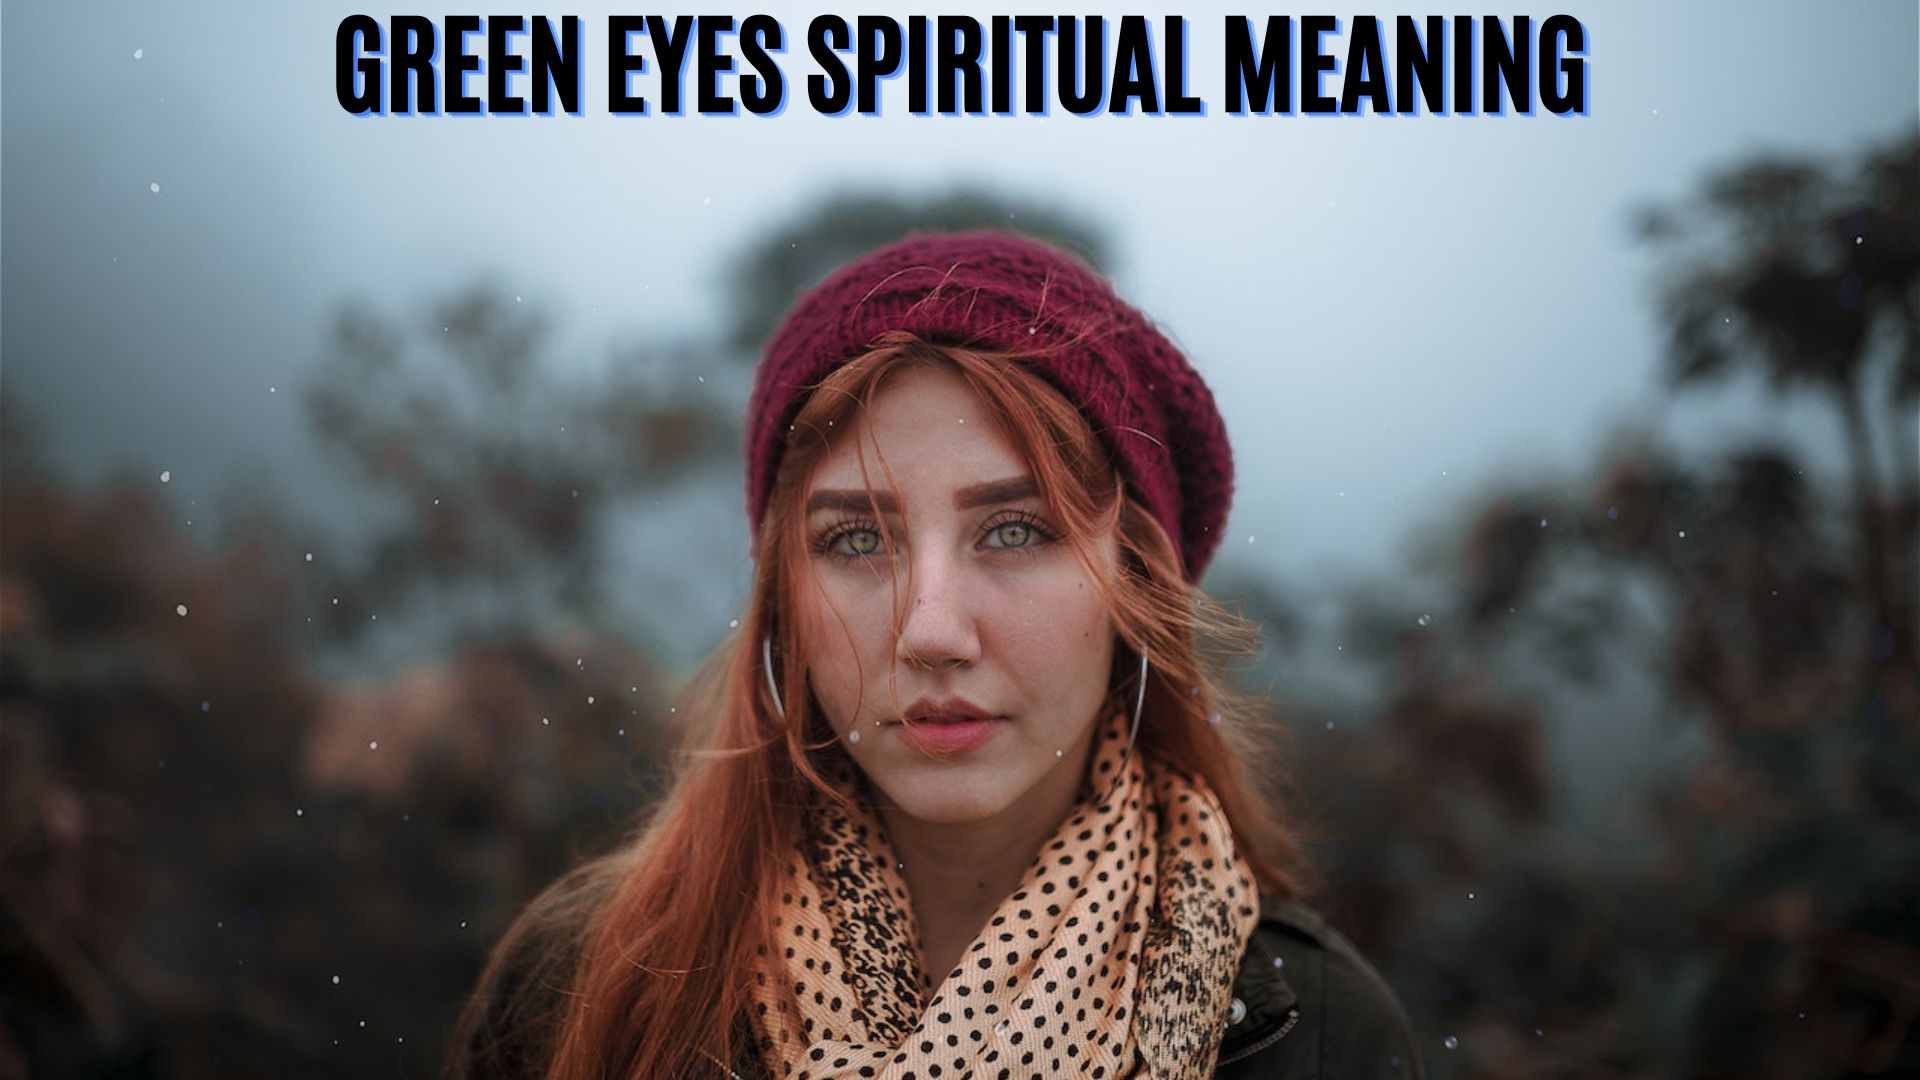 Green Eyes Spiritual Meaning Represents Purity And Innocence